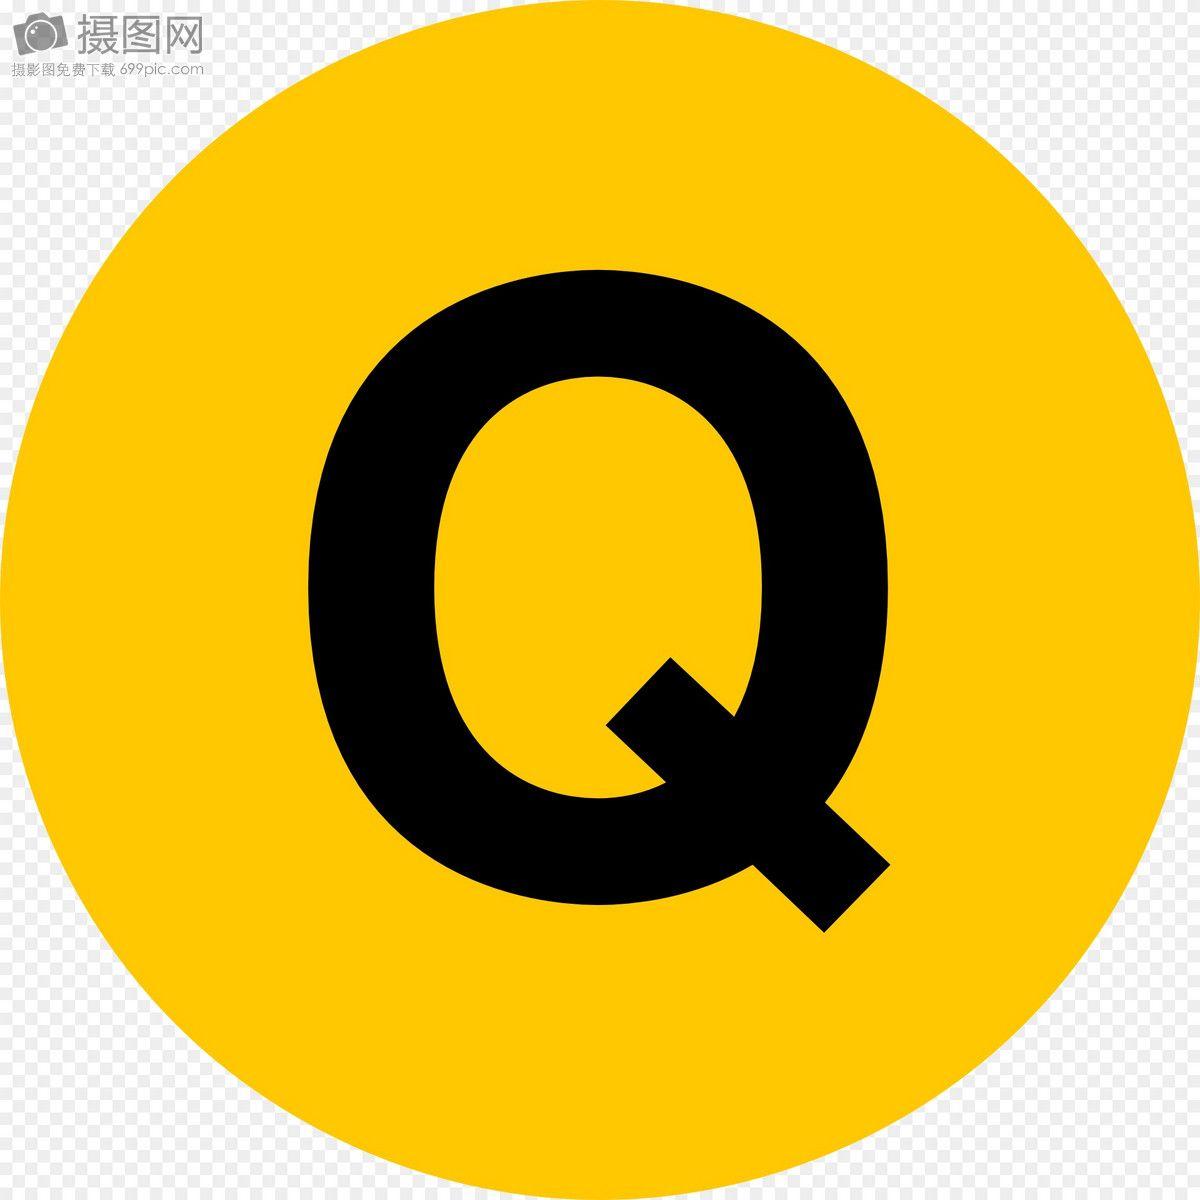 Round Black and Yellow Logo - Yellow round black q graphics image_picture free download ...